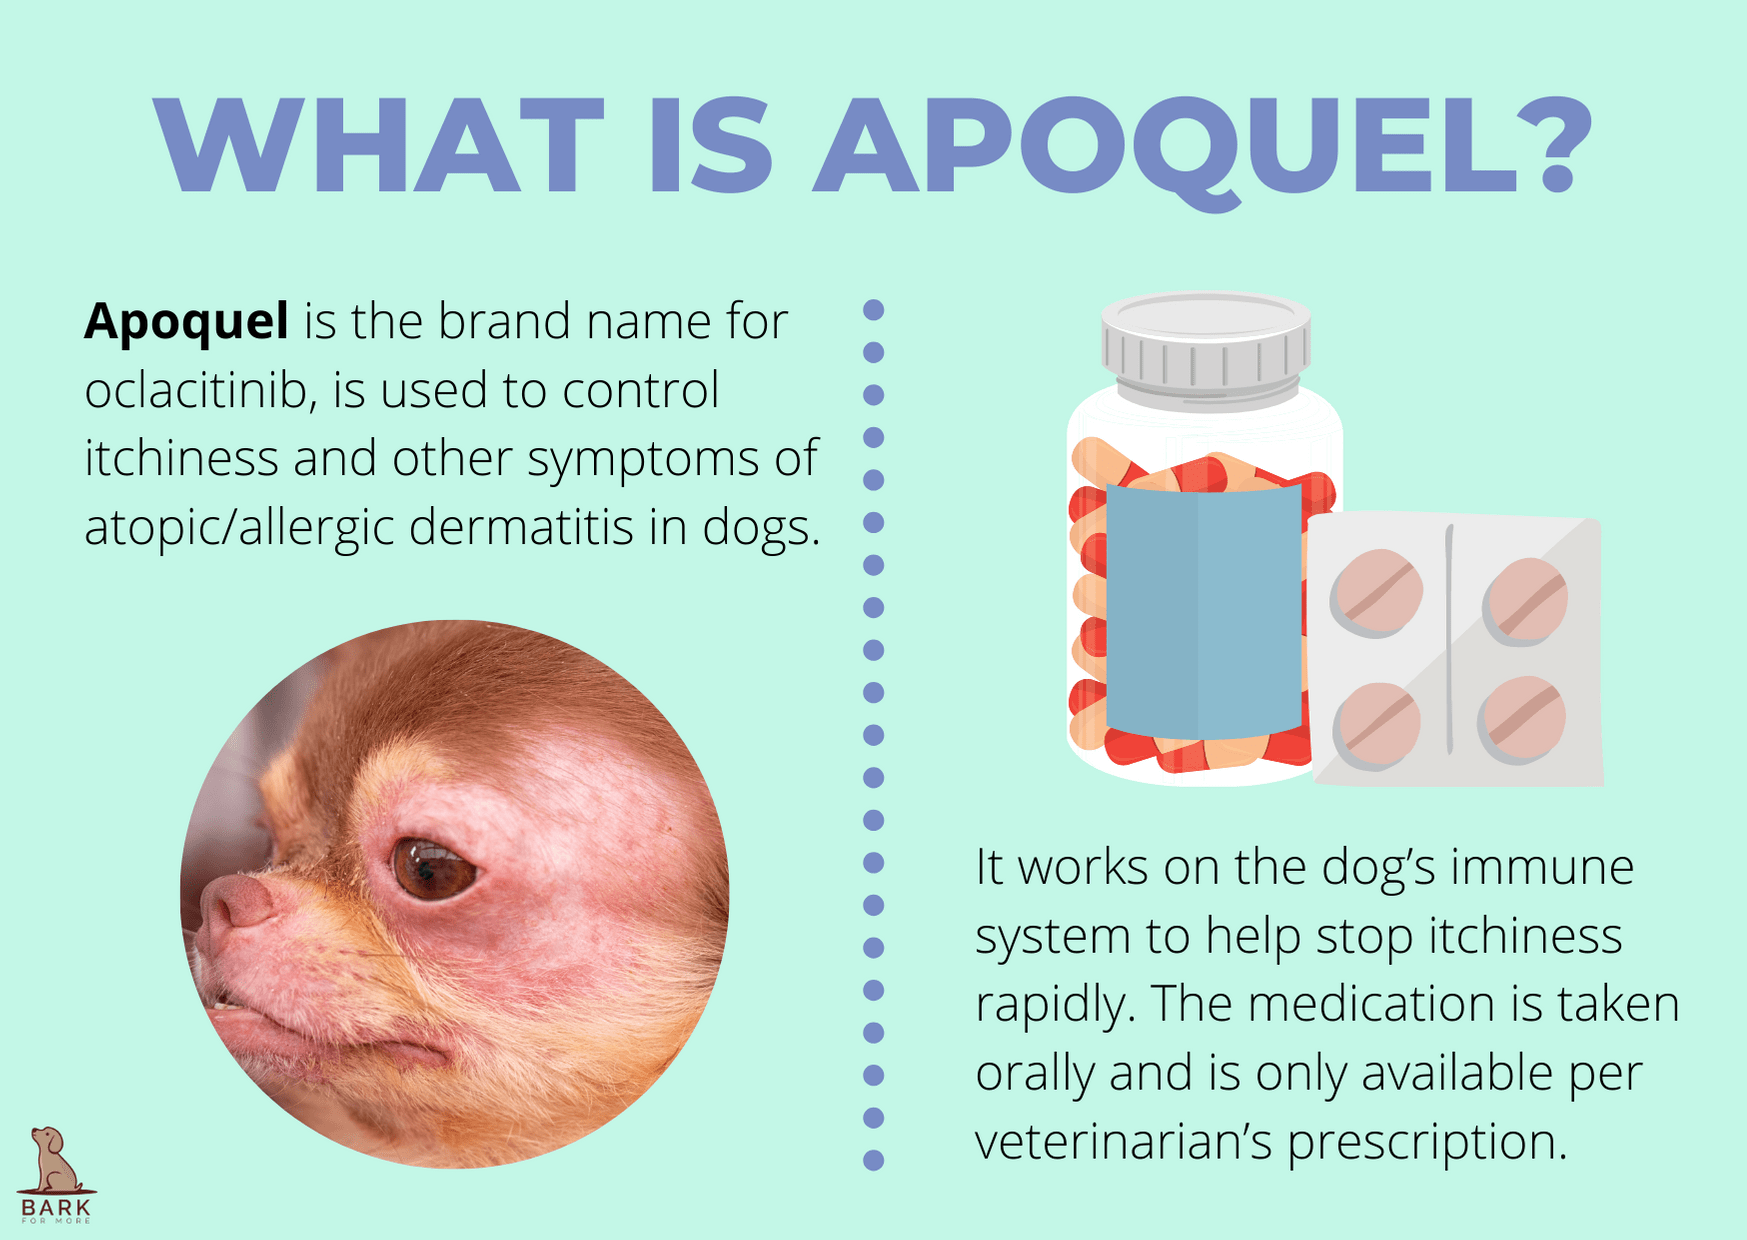 What is Apoquel